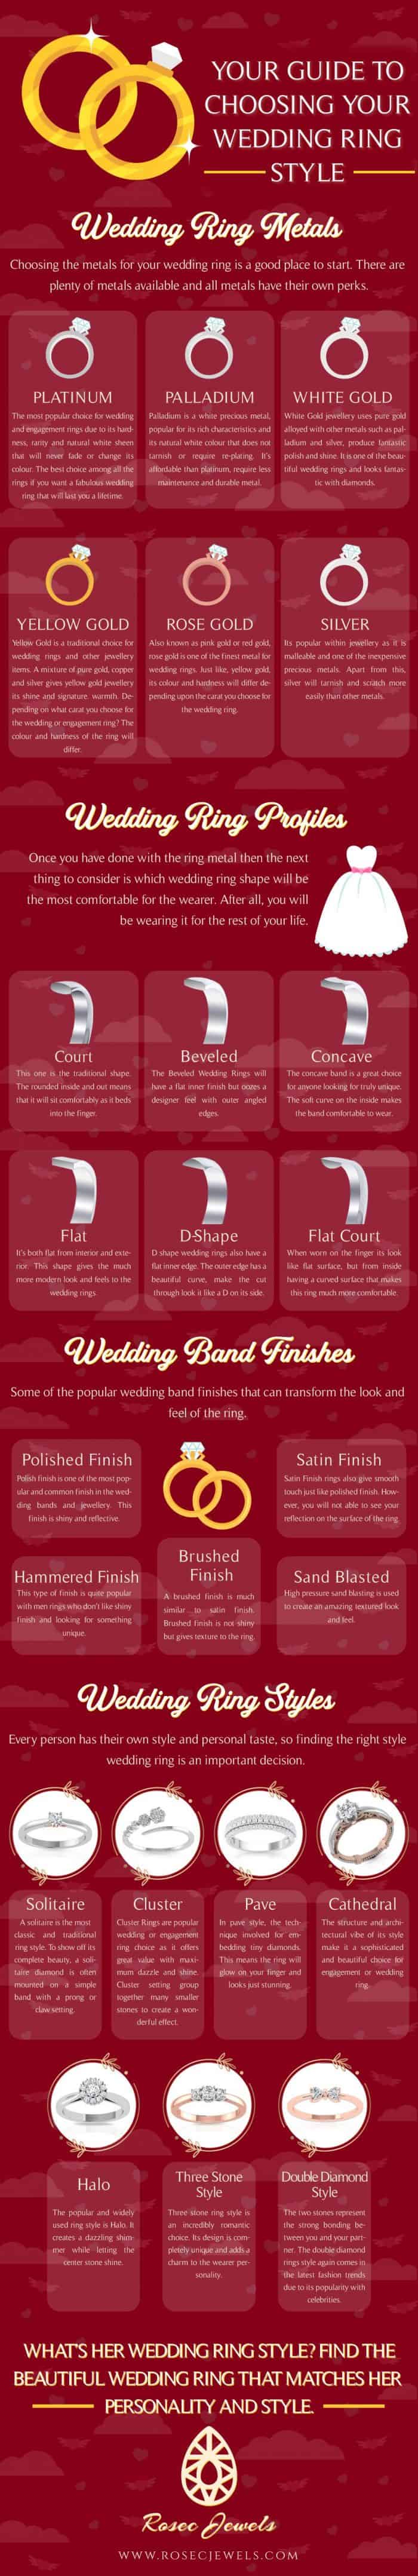 how to choose the style of wedding ring for you